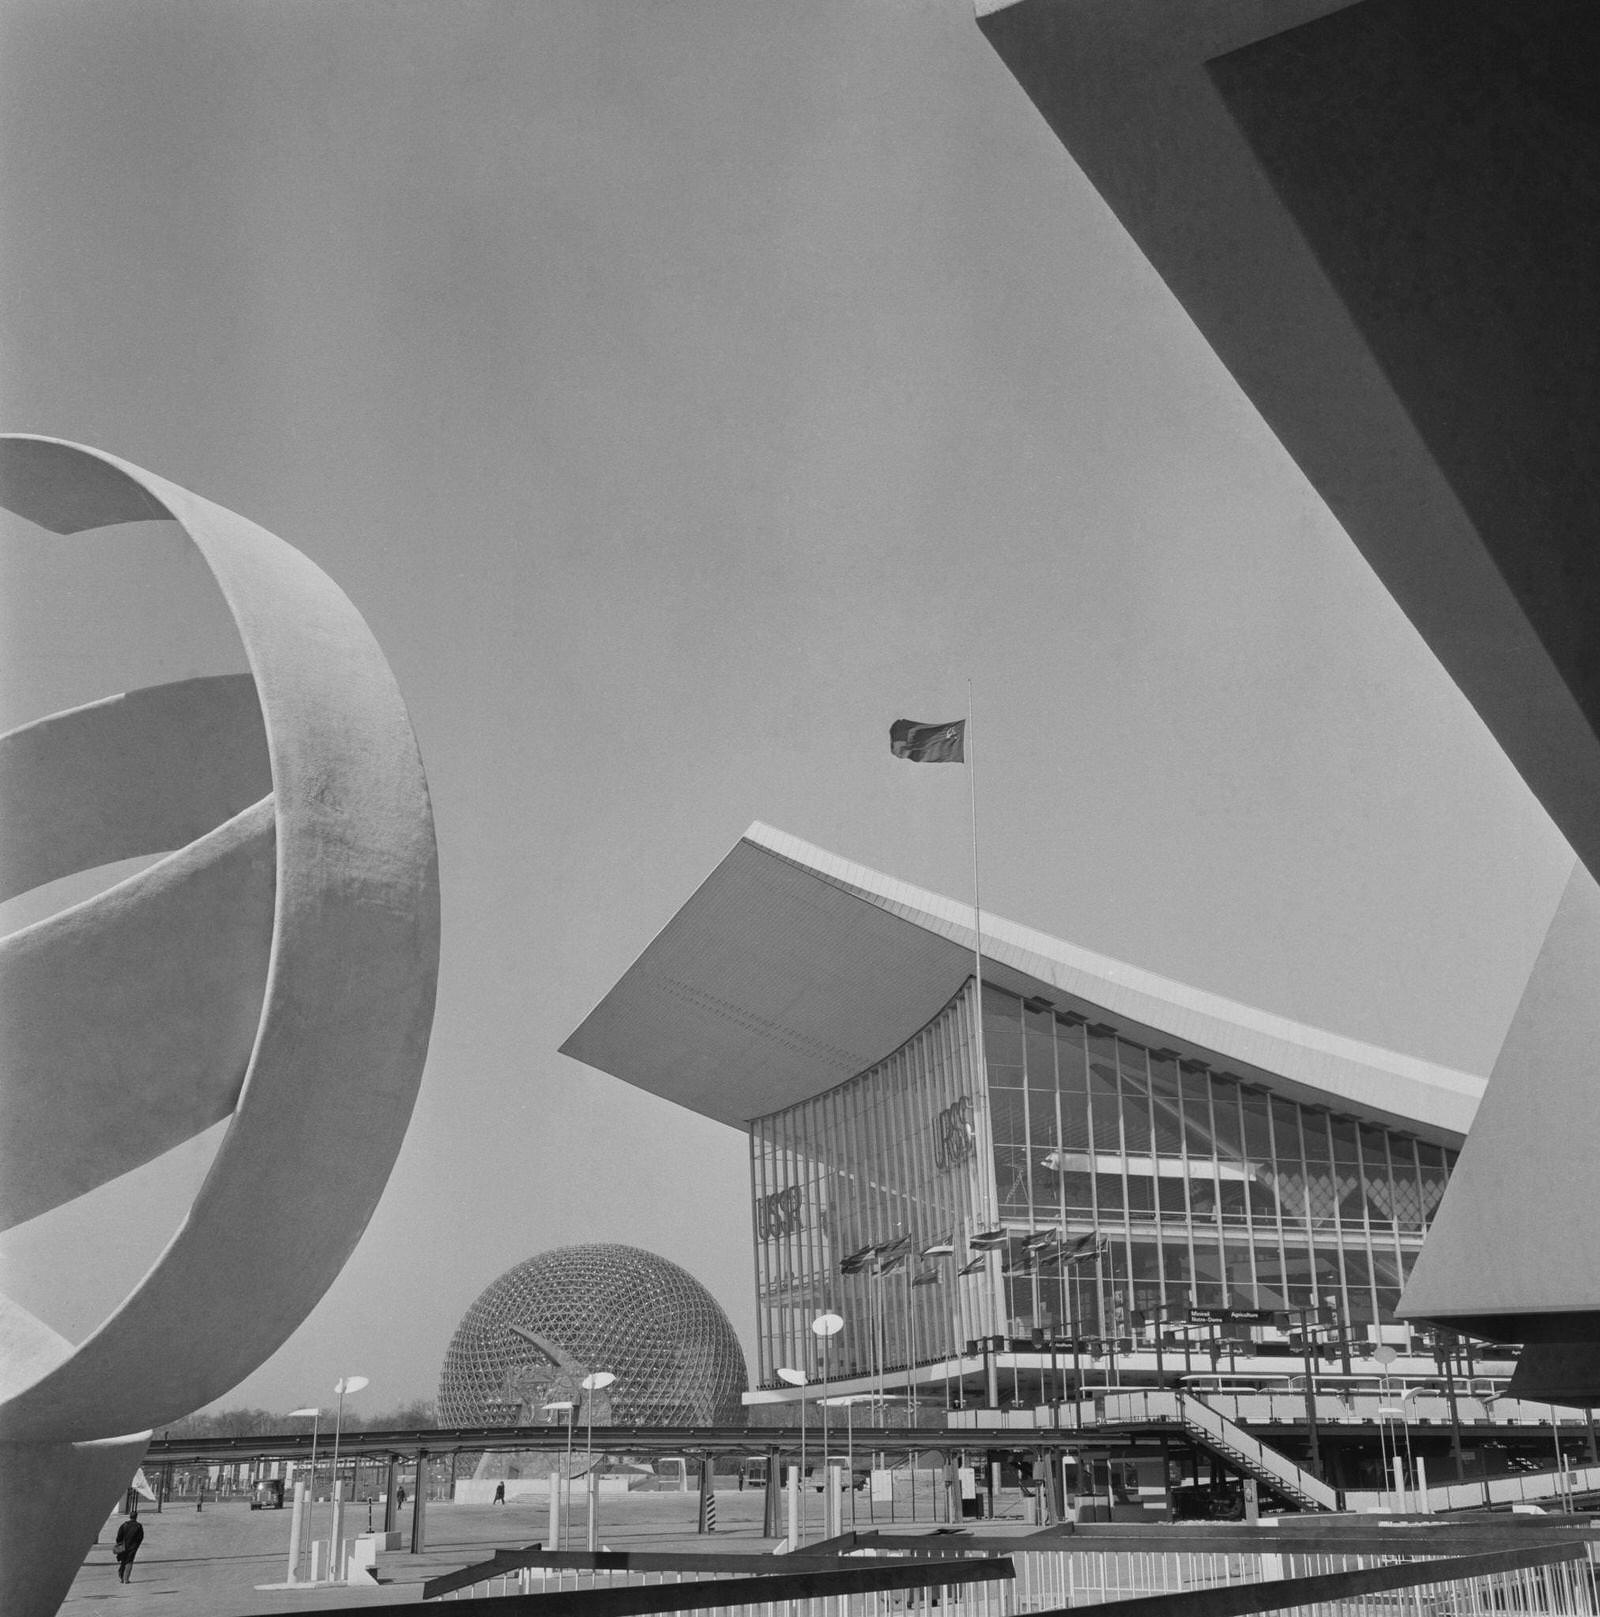 The pavilion of the USSR at the exhibition in Montreal, in 1967.